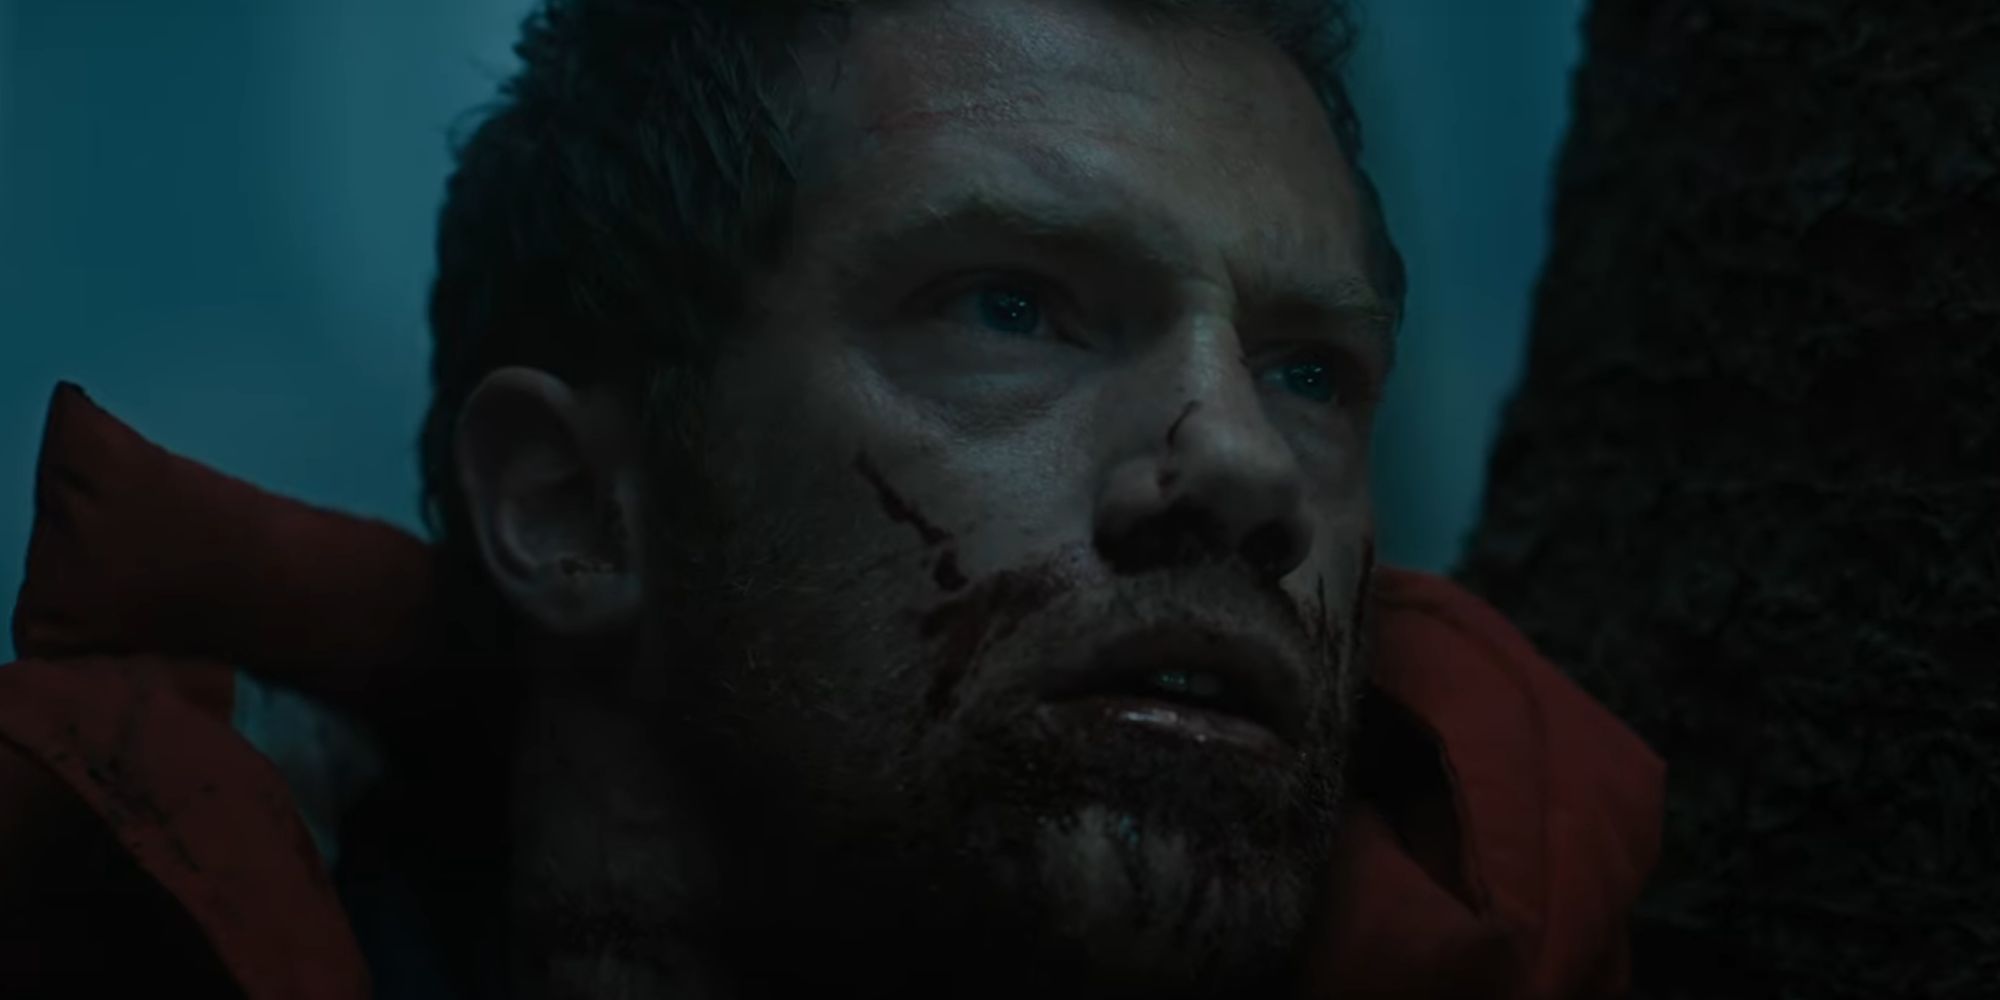 Alistair Brammer looking bloodied and afraid as John in The Watchers trailer